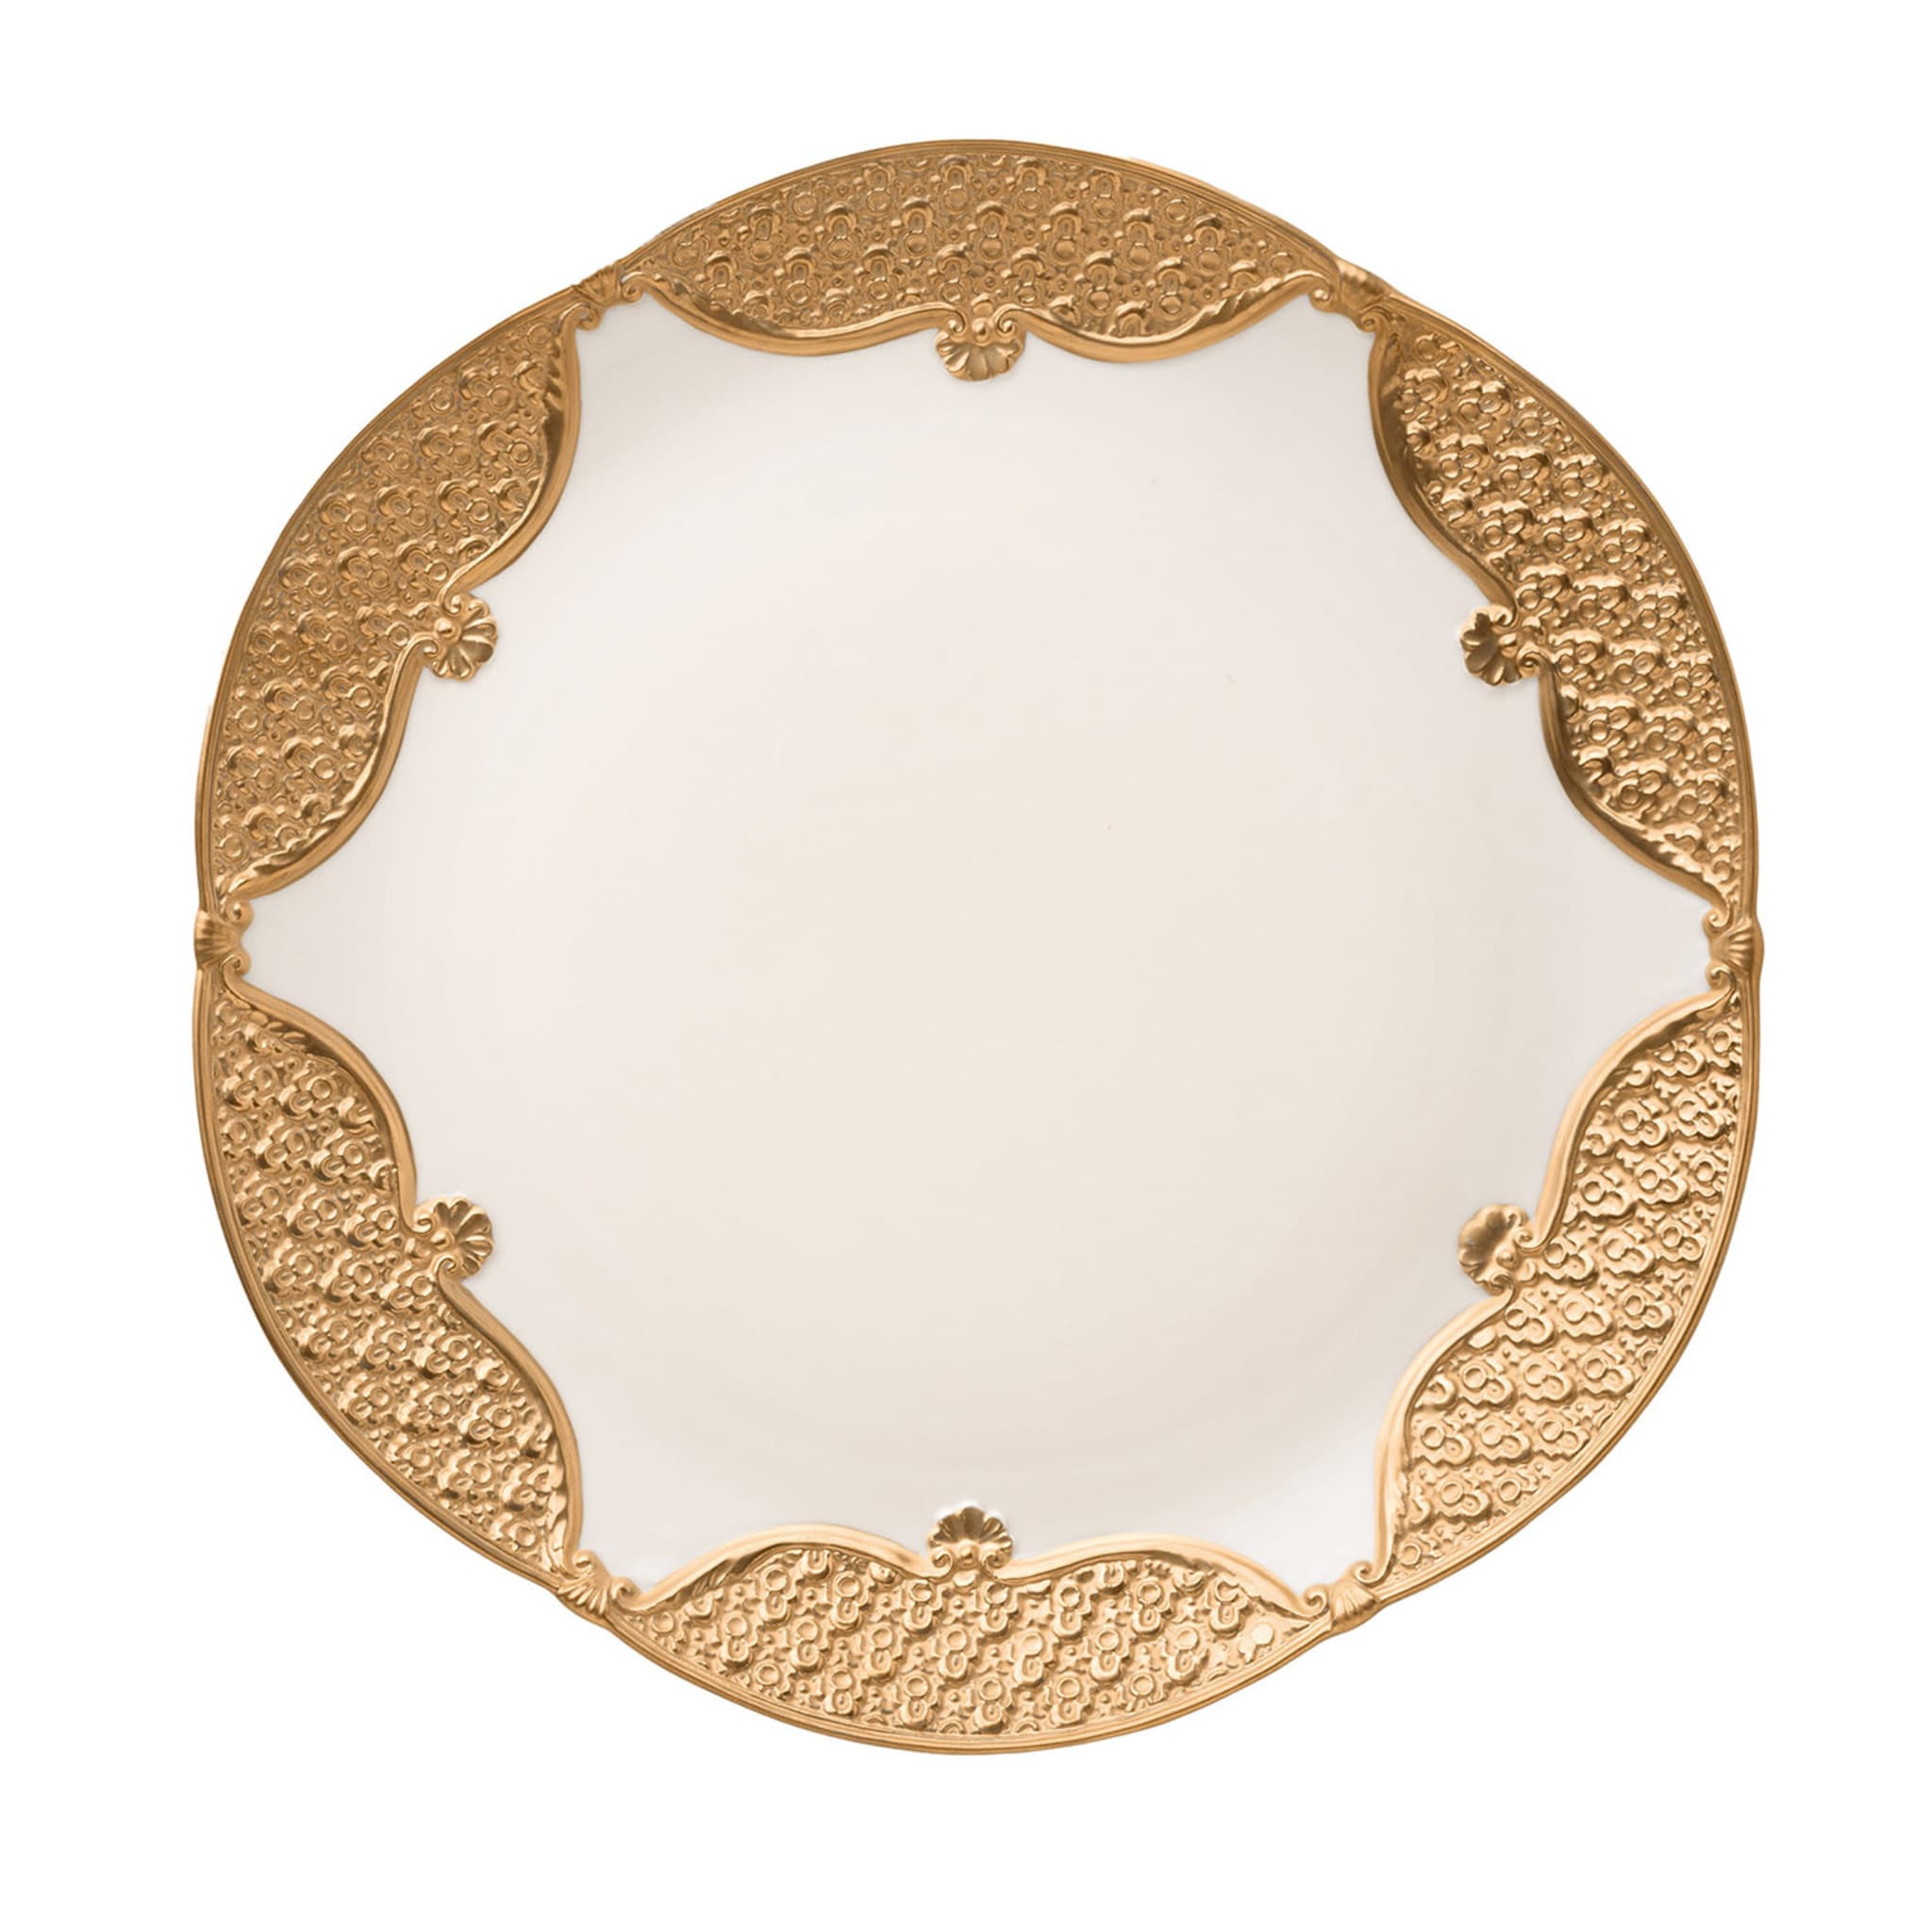 Caterina Set of 2 White & Gold Dinner Plates - Main view